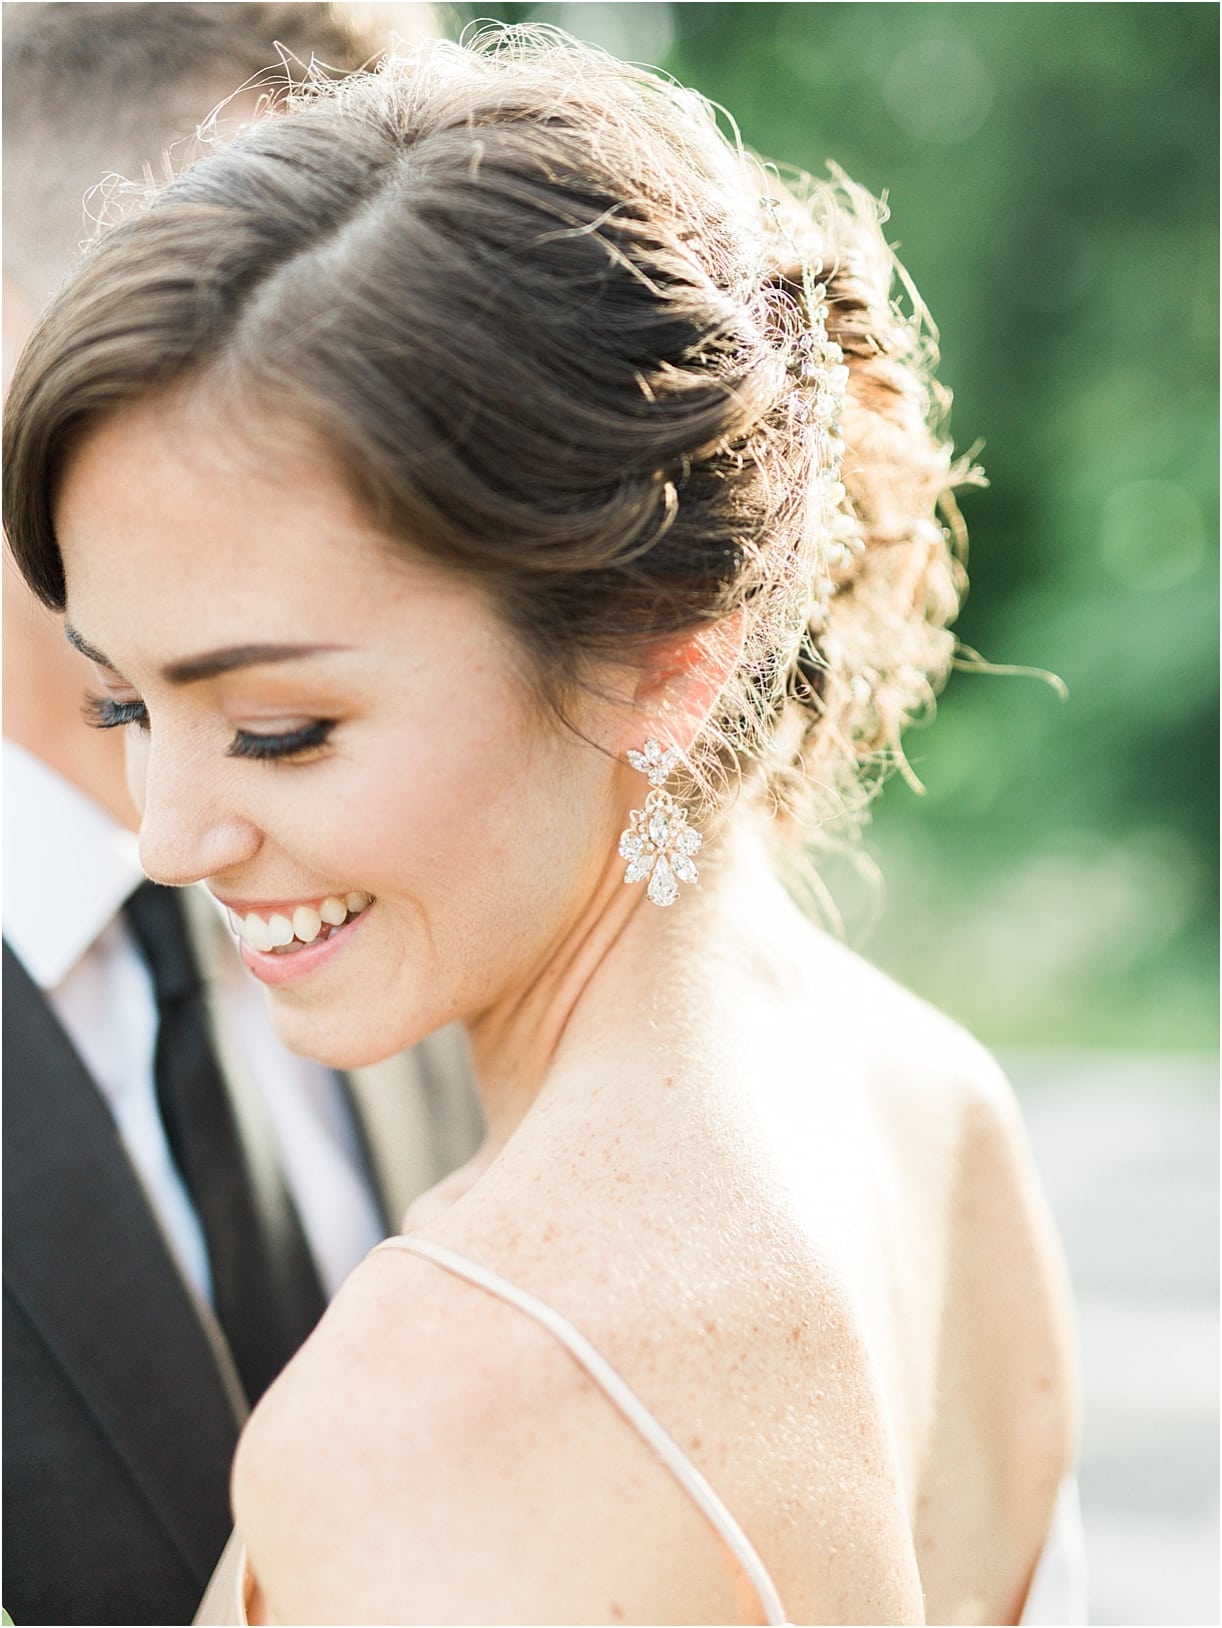 Peach Inspired Wedding Inspiration at the Arboretum Bride Earrings Dangle Statement